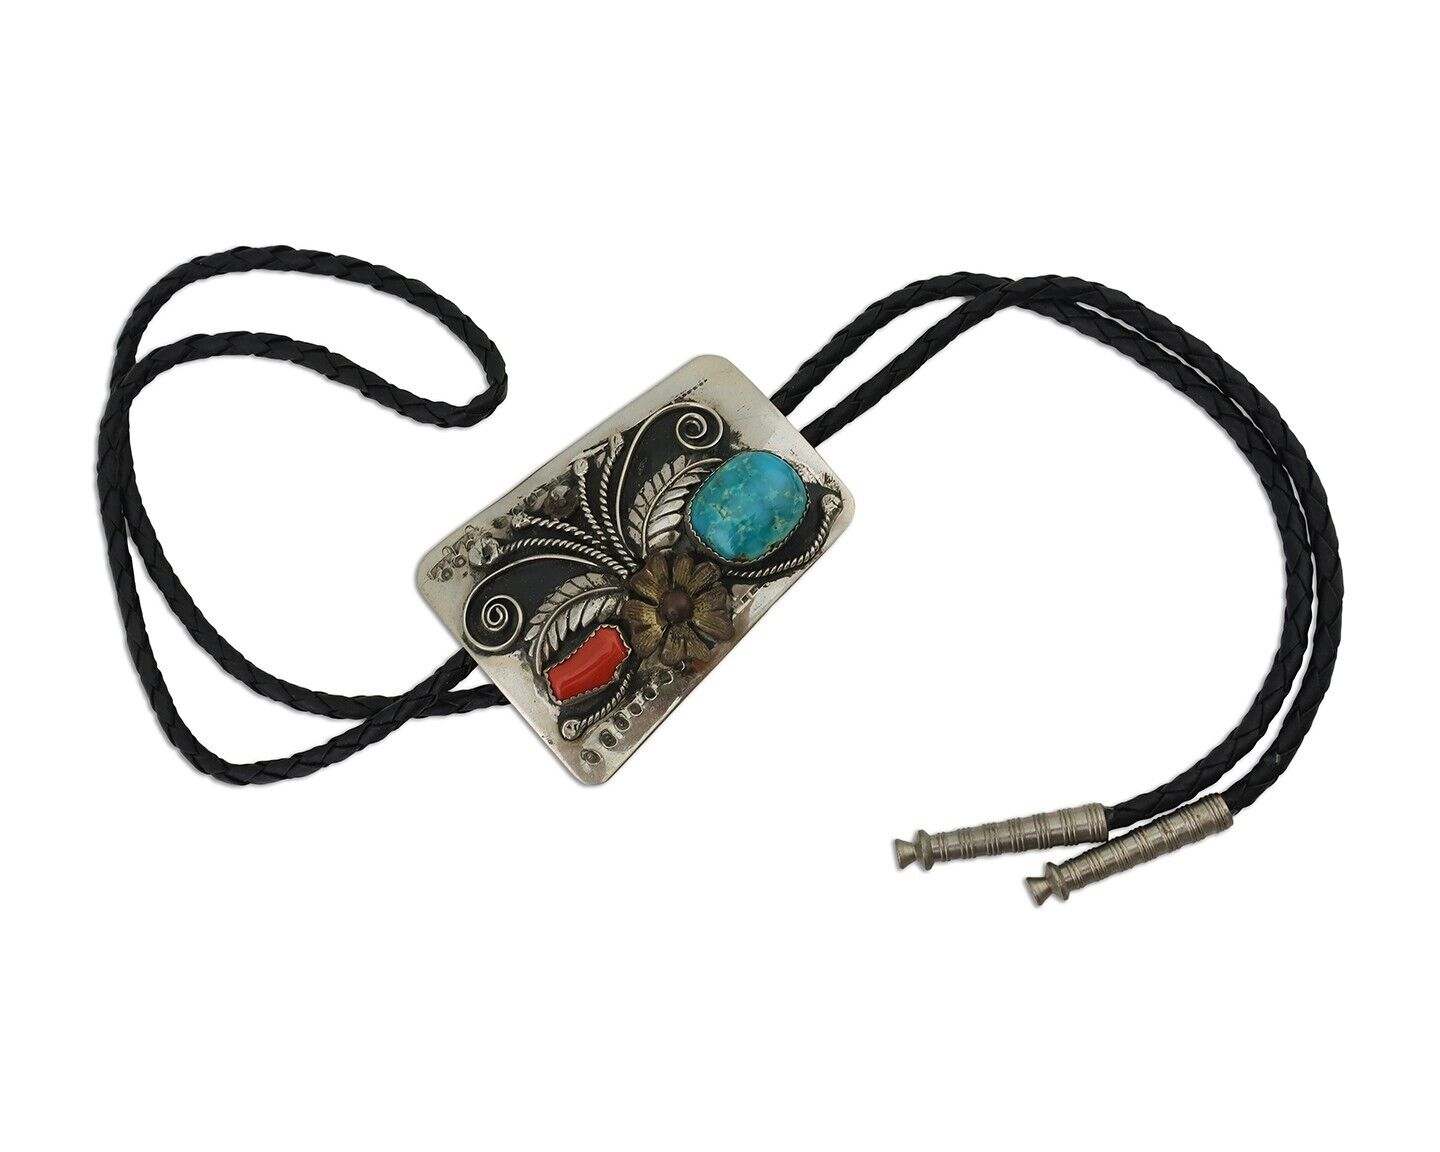 Navajo Bolo Tie .999 Nickel Coral & Turquoise Signed BENNETT C.80's